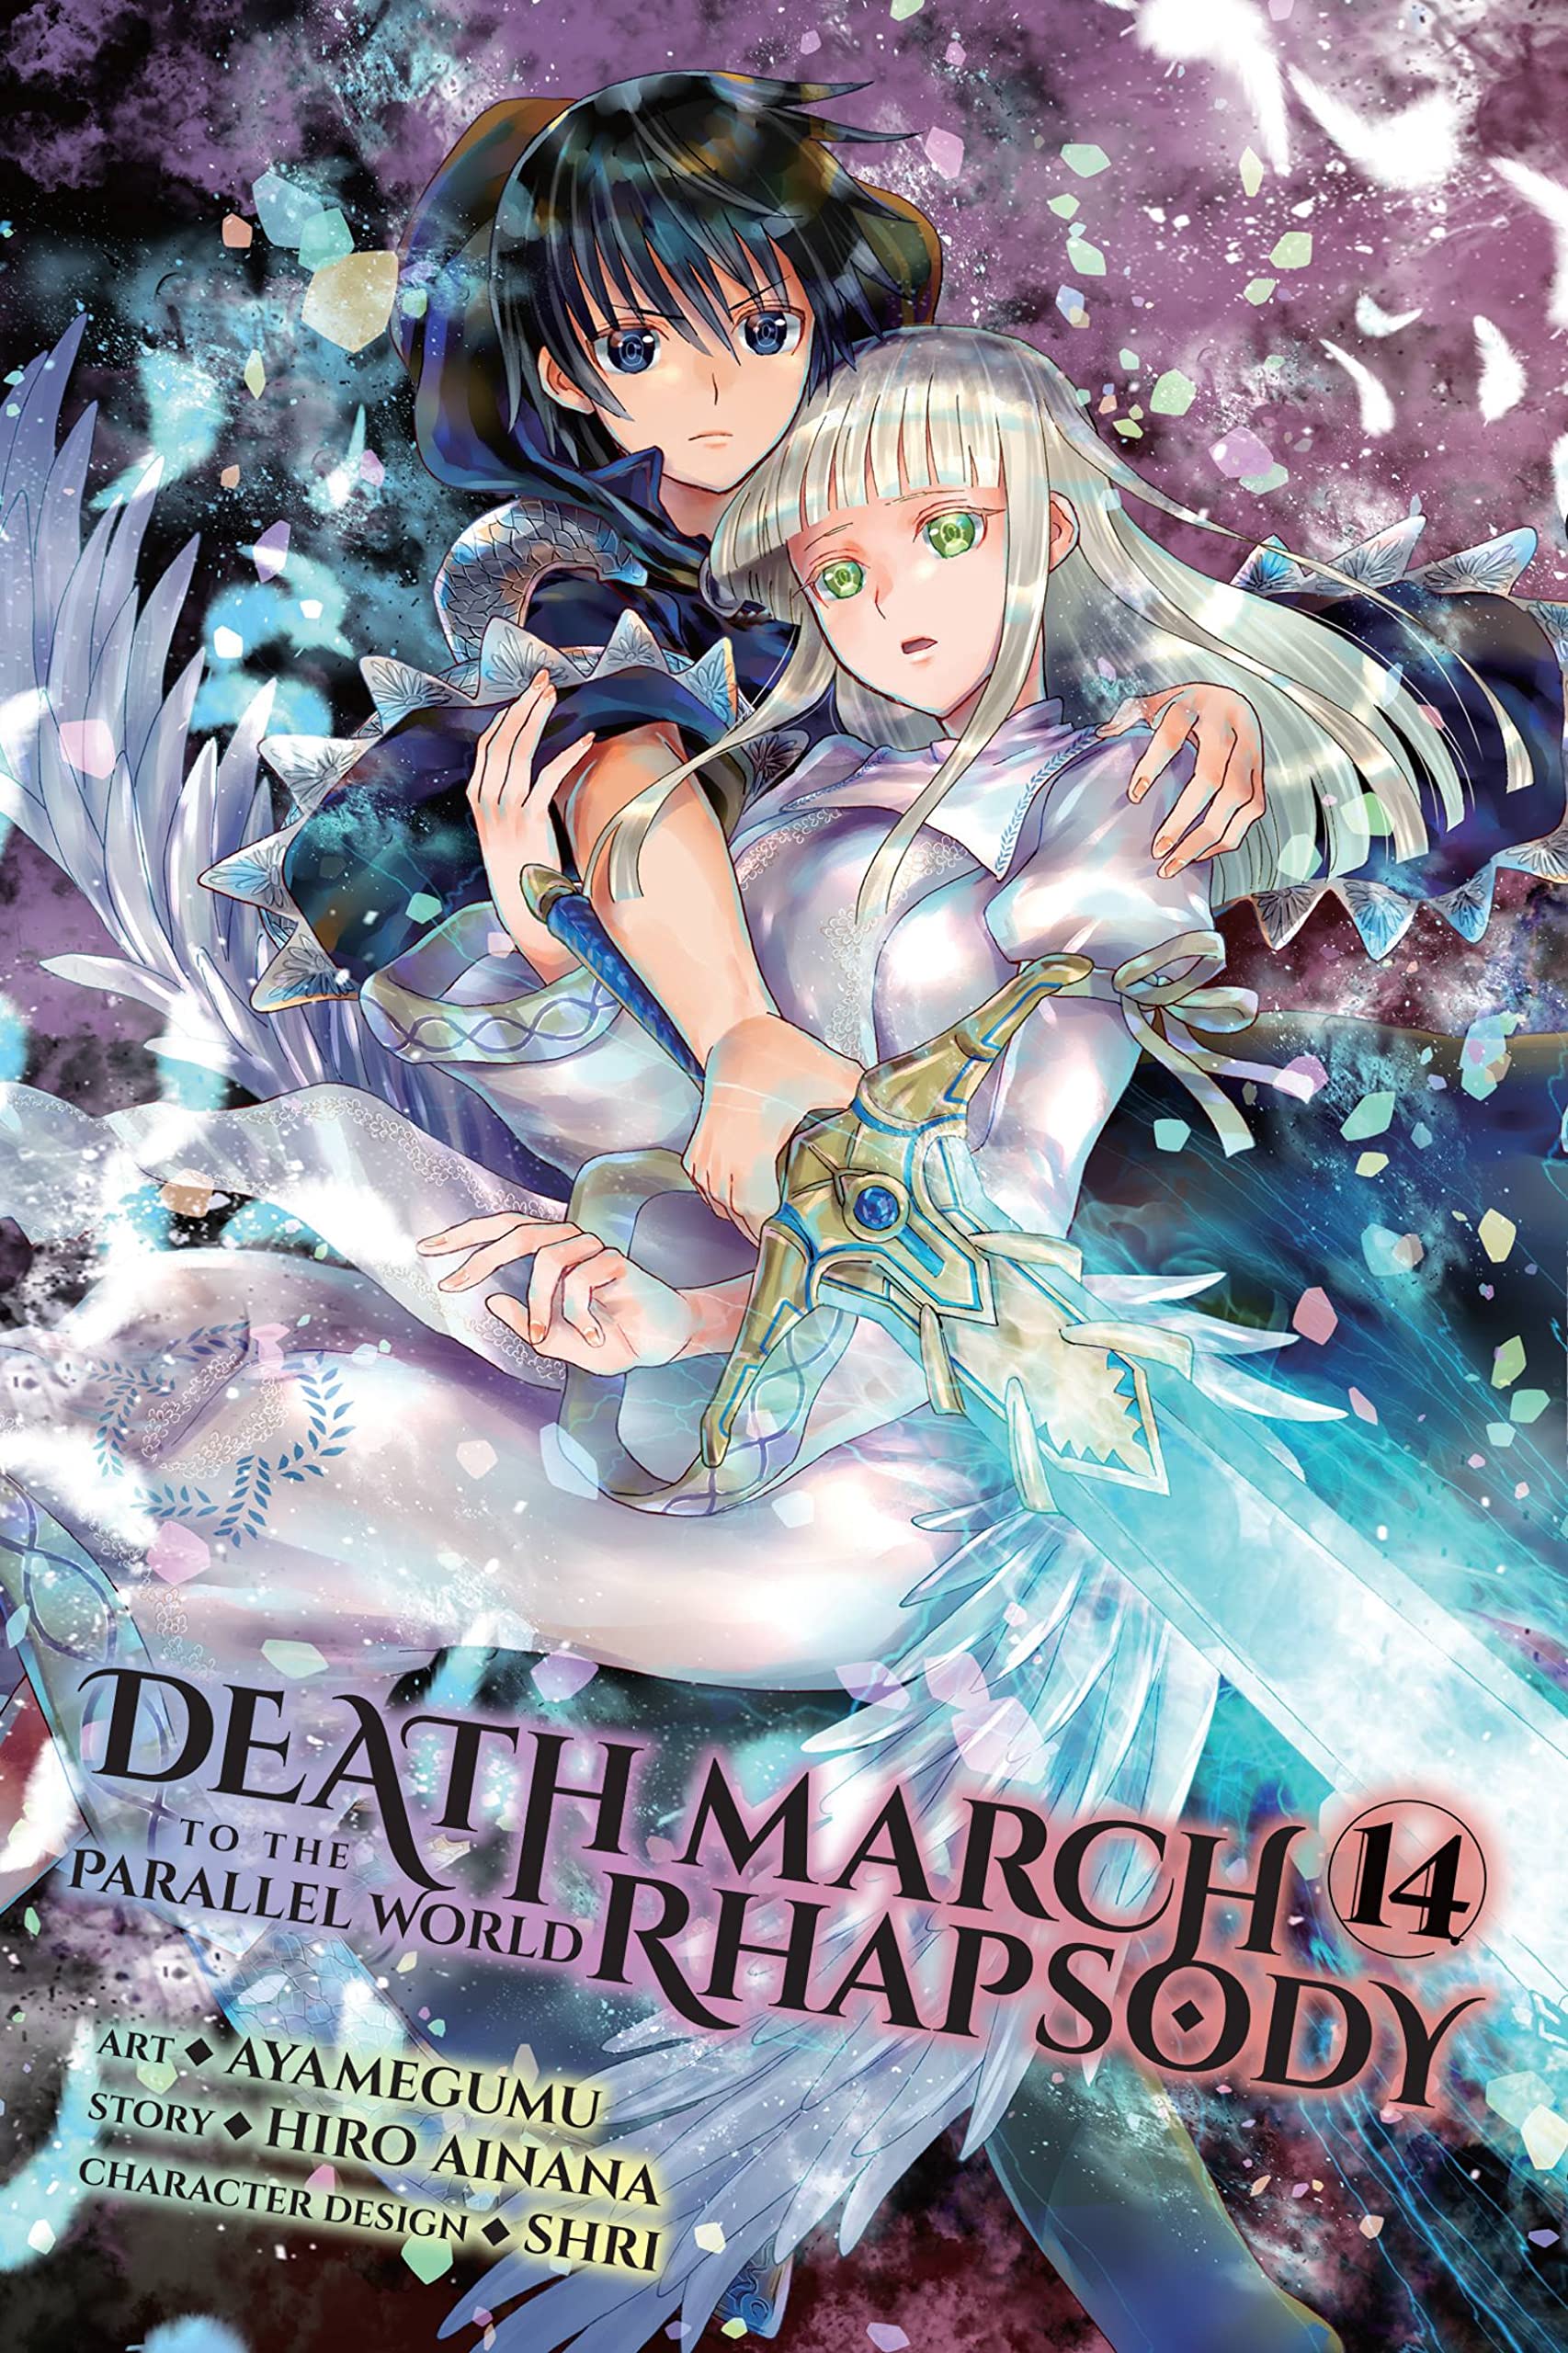 Death March to the Parallel World Rhapsody Vol. 14 (Manga)